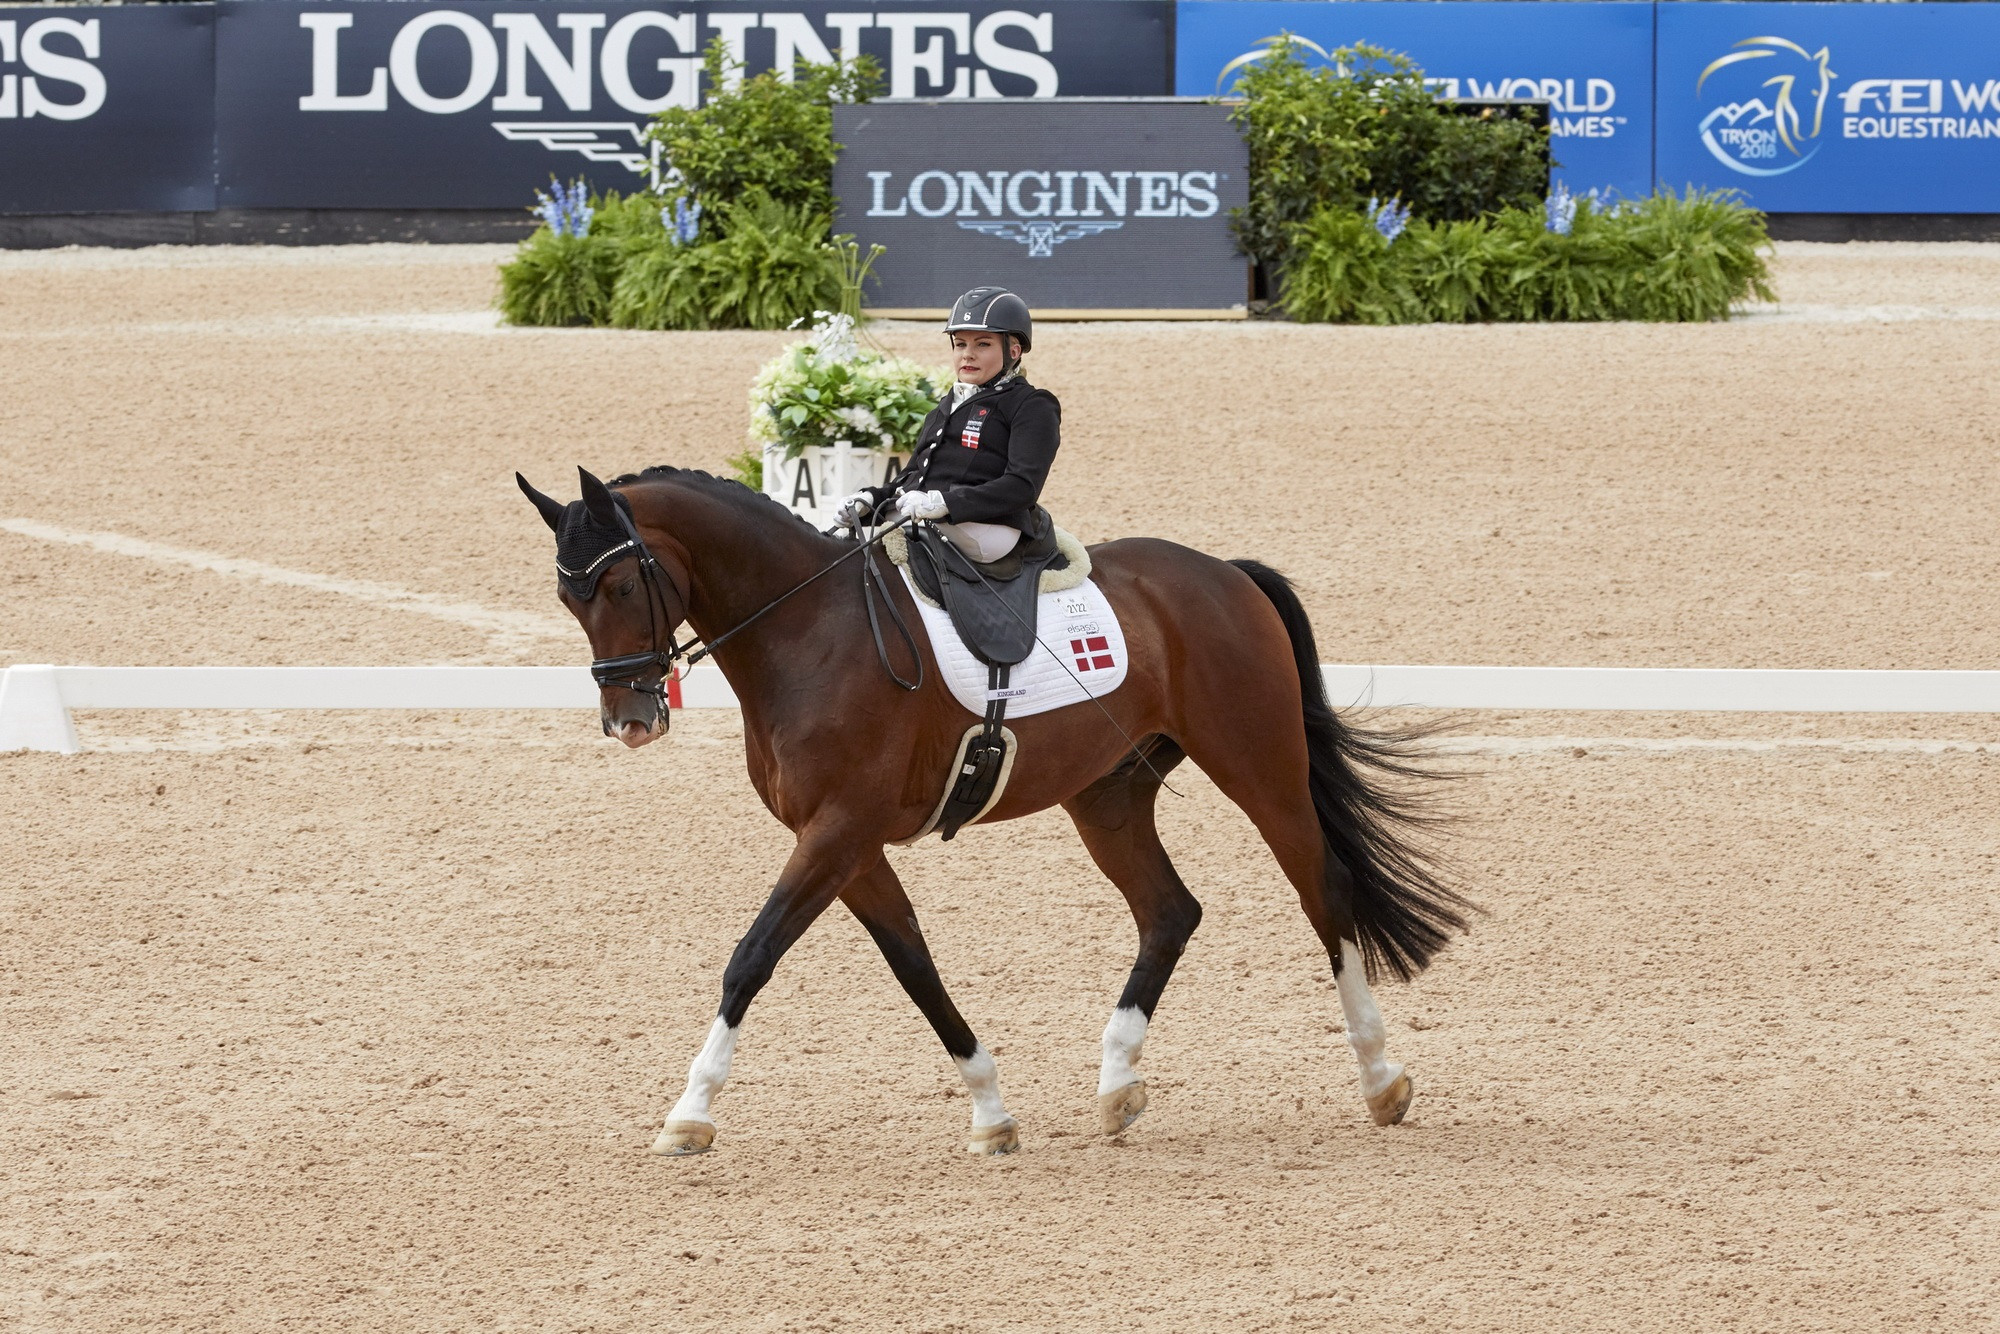 Danish Paralympian Kaastrup takes her first global crown at World Equestrian Games